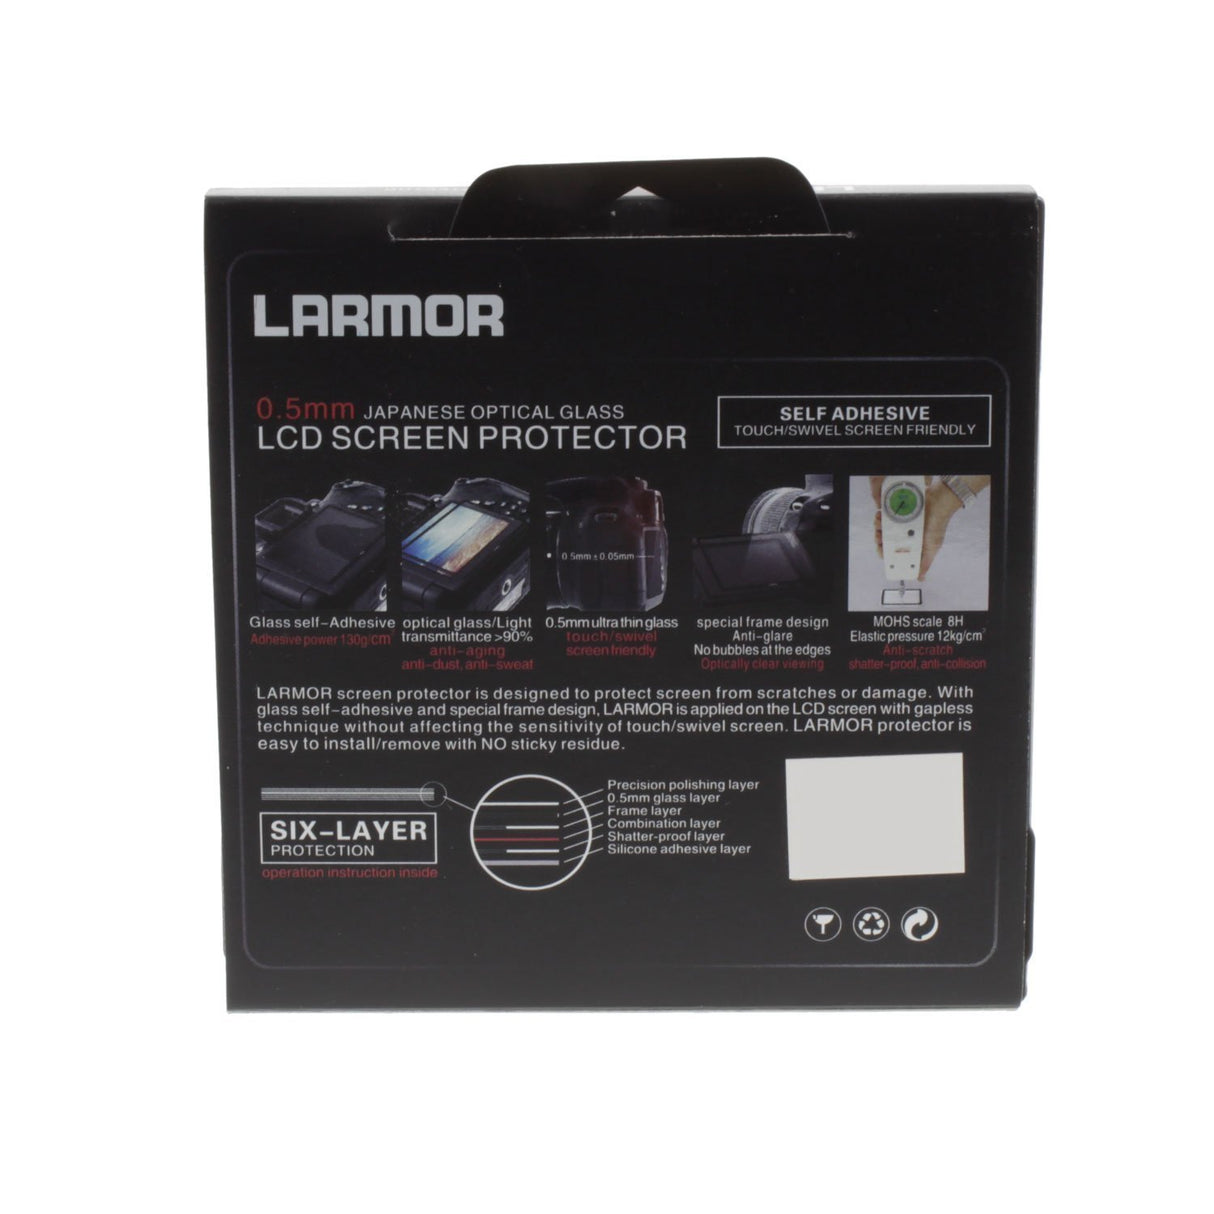 LARMOR by GGs 4 Generation Selfadhesive Glass LCD Screen Protector for Nikon D7100 Camera